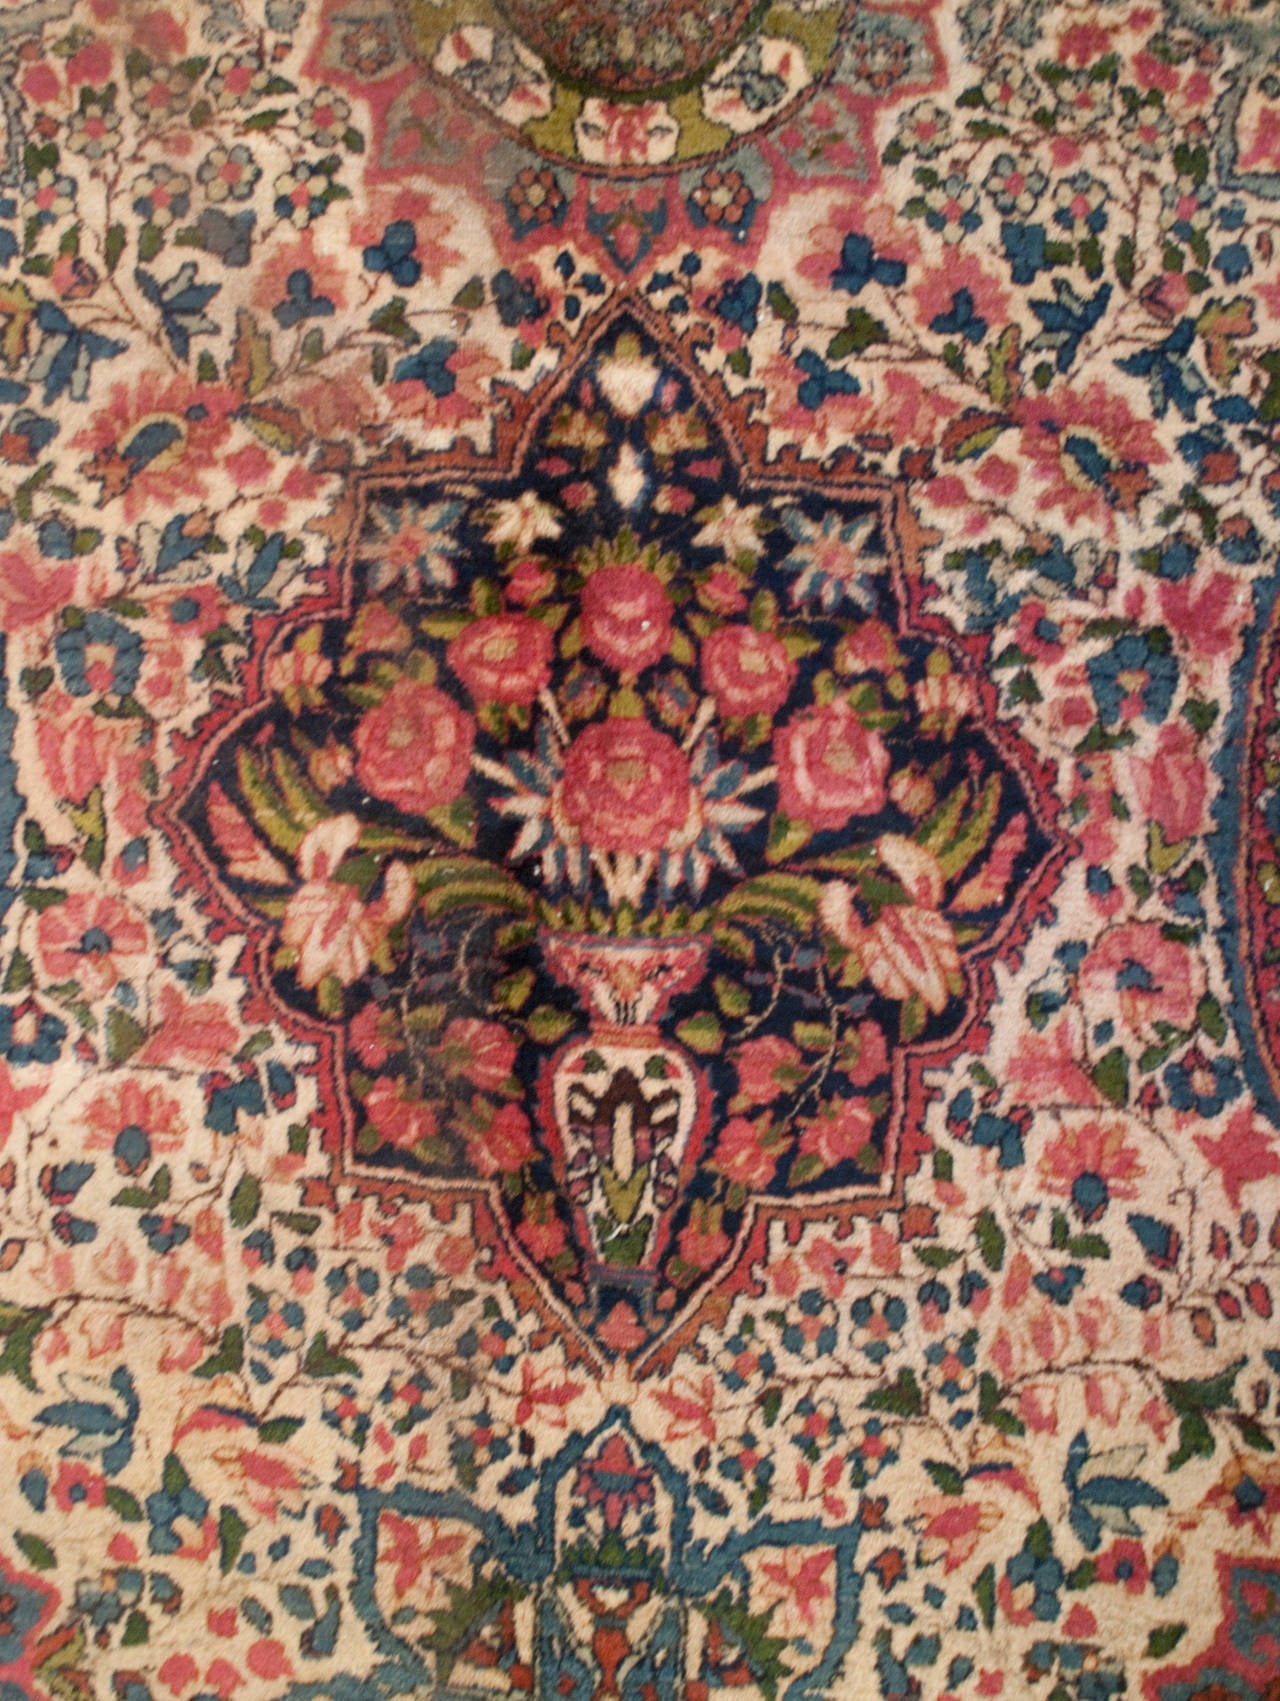 A wonderful early 20th century Persian Kirman rug with multiple floral medallions amidst an intricately woven field of flowers, surrounded by multiple complementary floral borders.